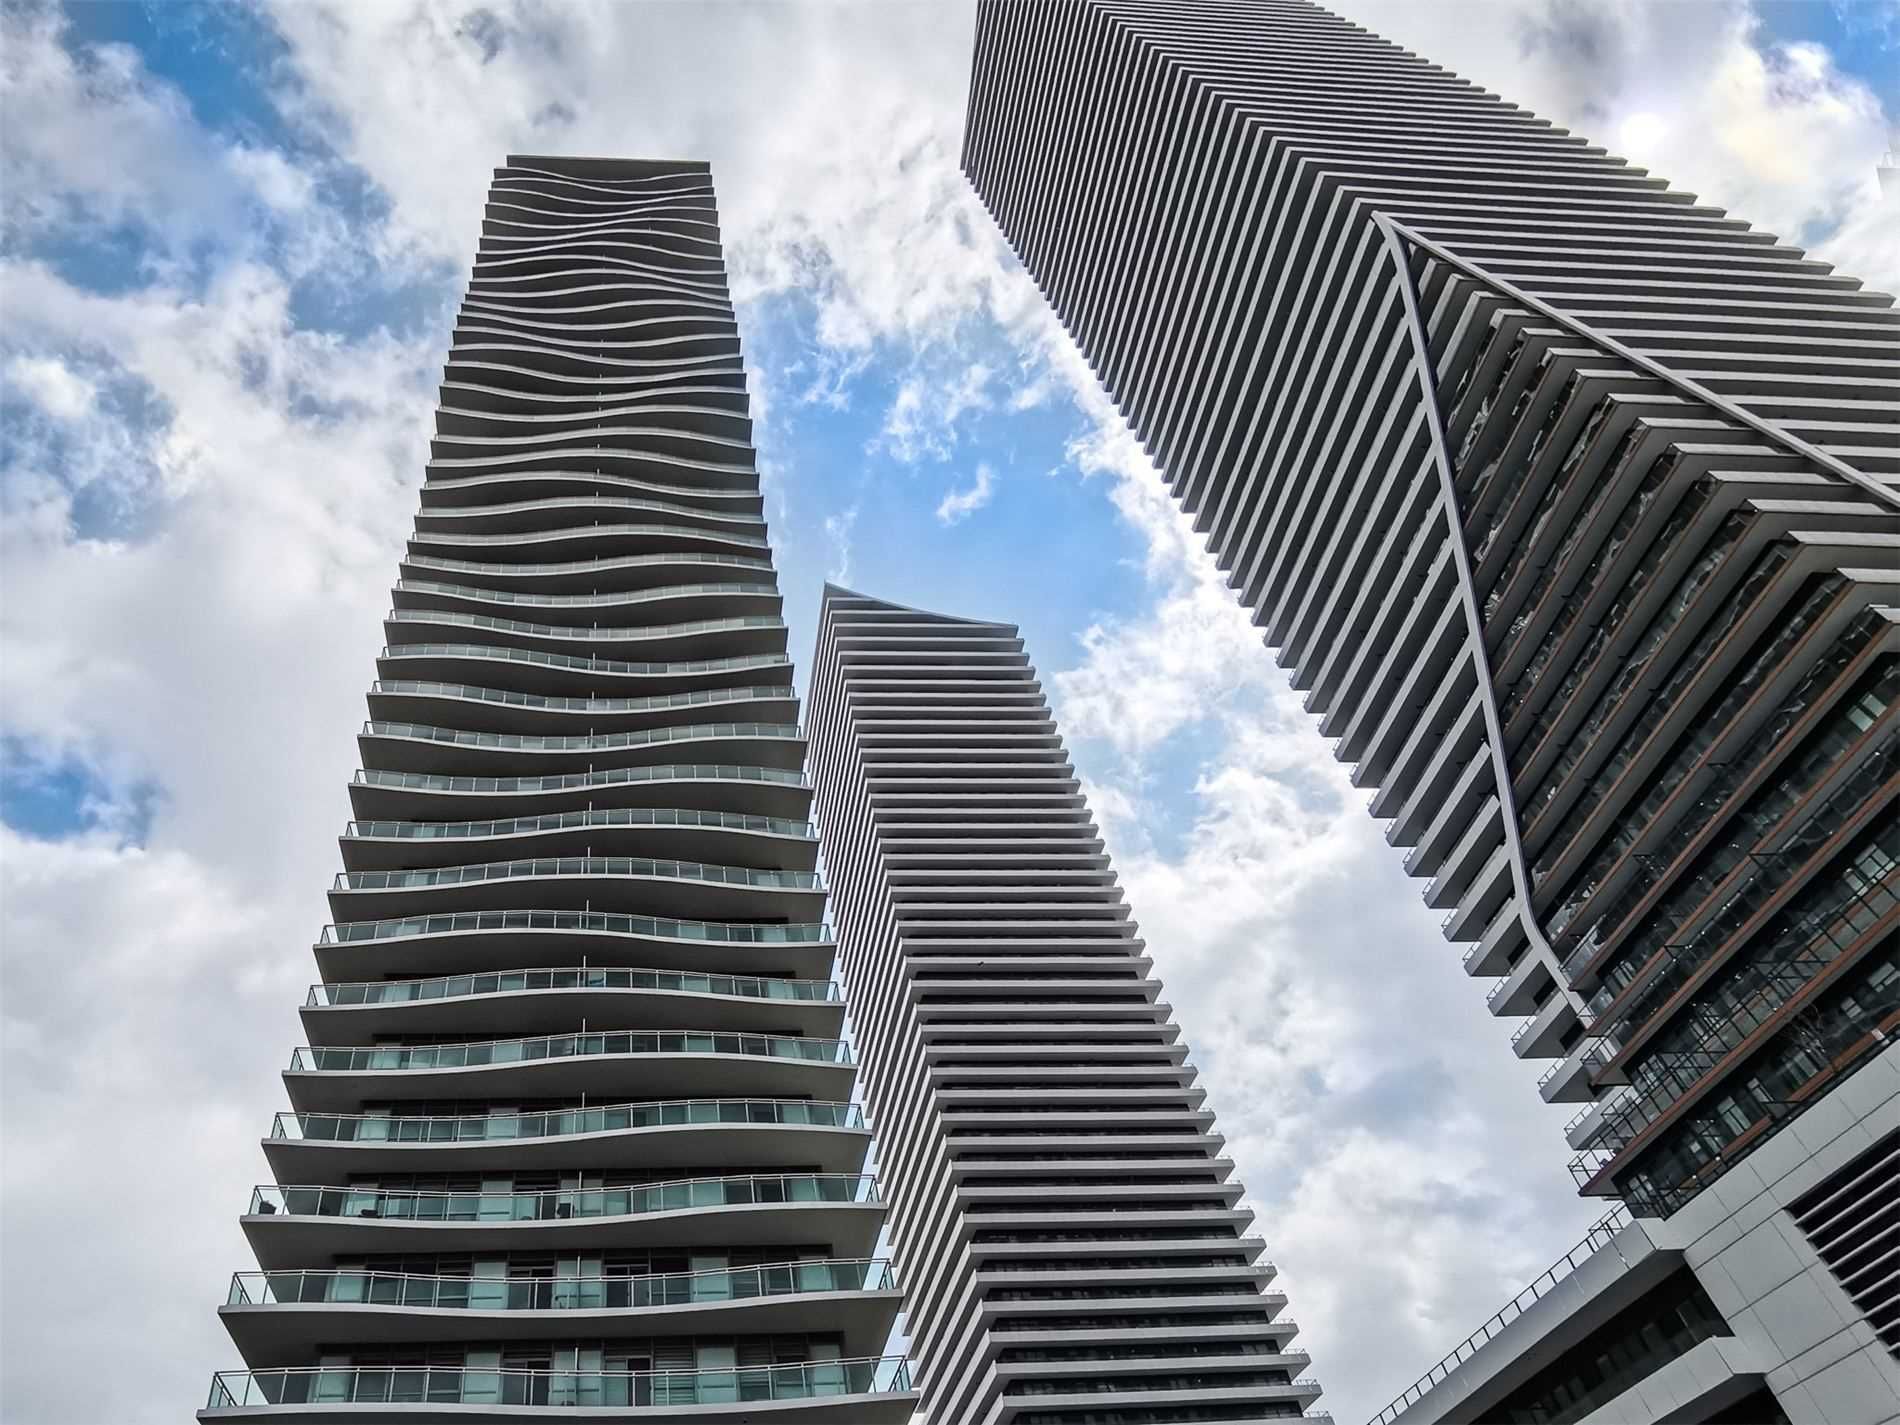 33 Shore Breeze Dr. This condo at Jade Waterfront Condos is located in  Etobicoke, Toronto - image #2 of 2 by Strata.ca